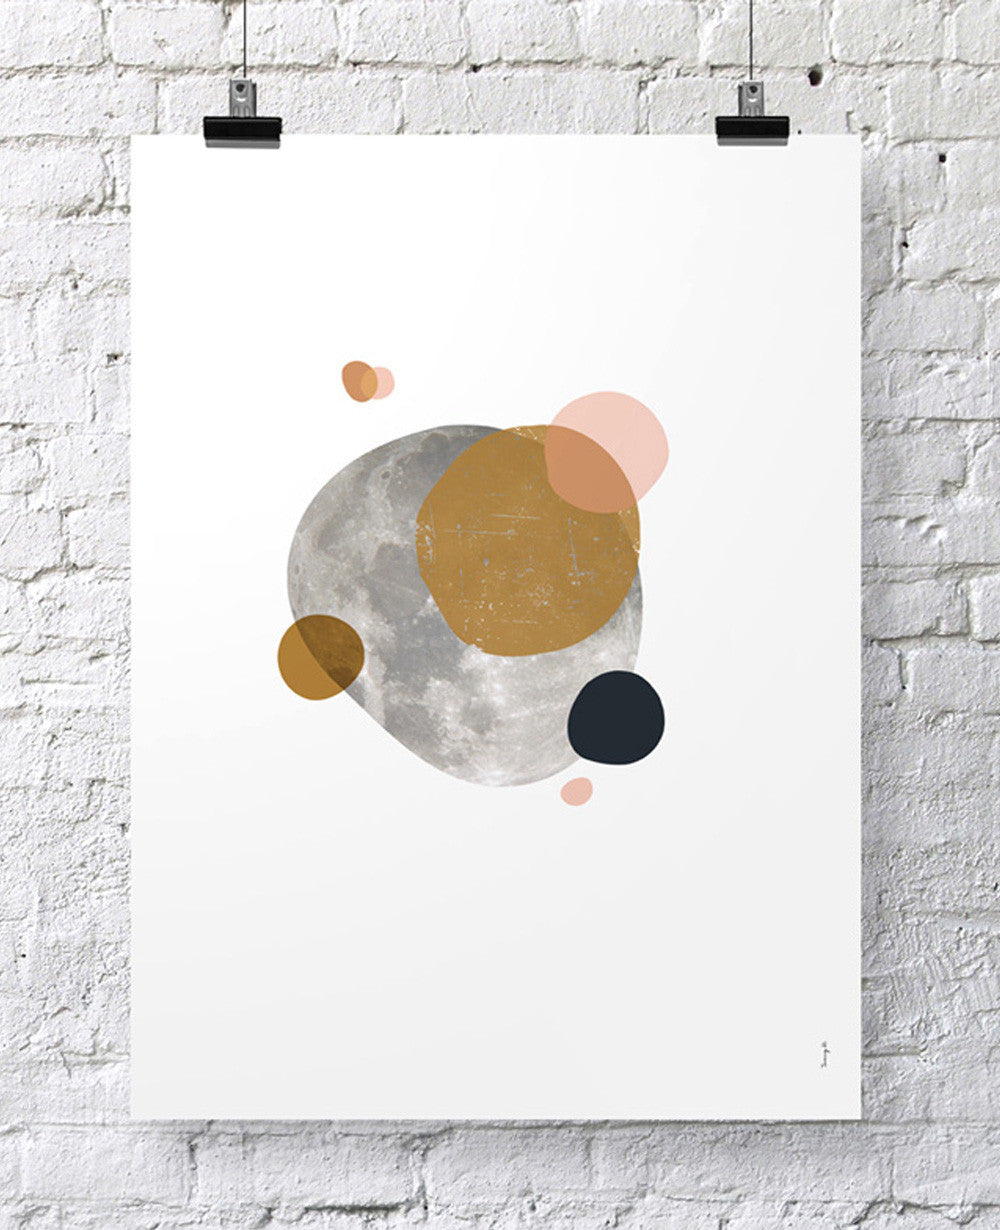 POSTER "OTHER SIDE OF THE MOON II"